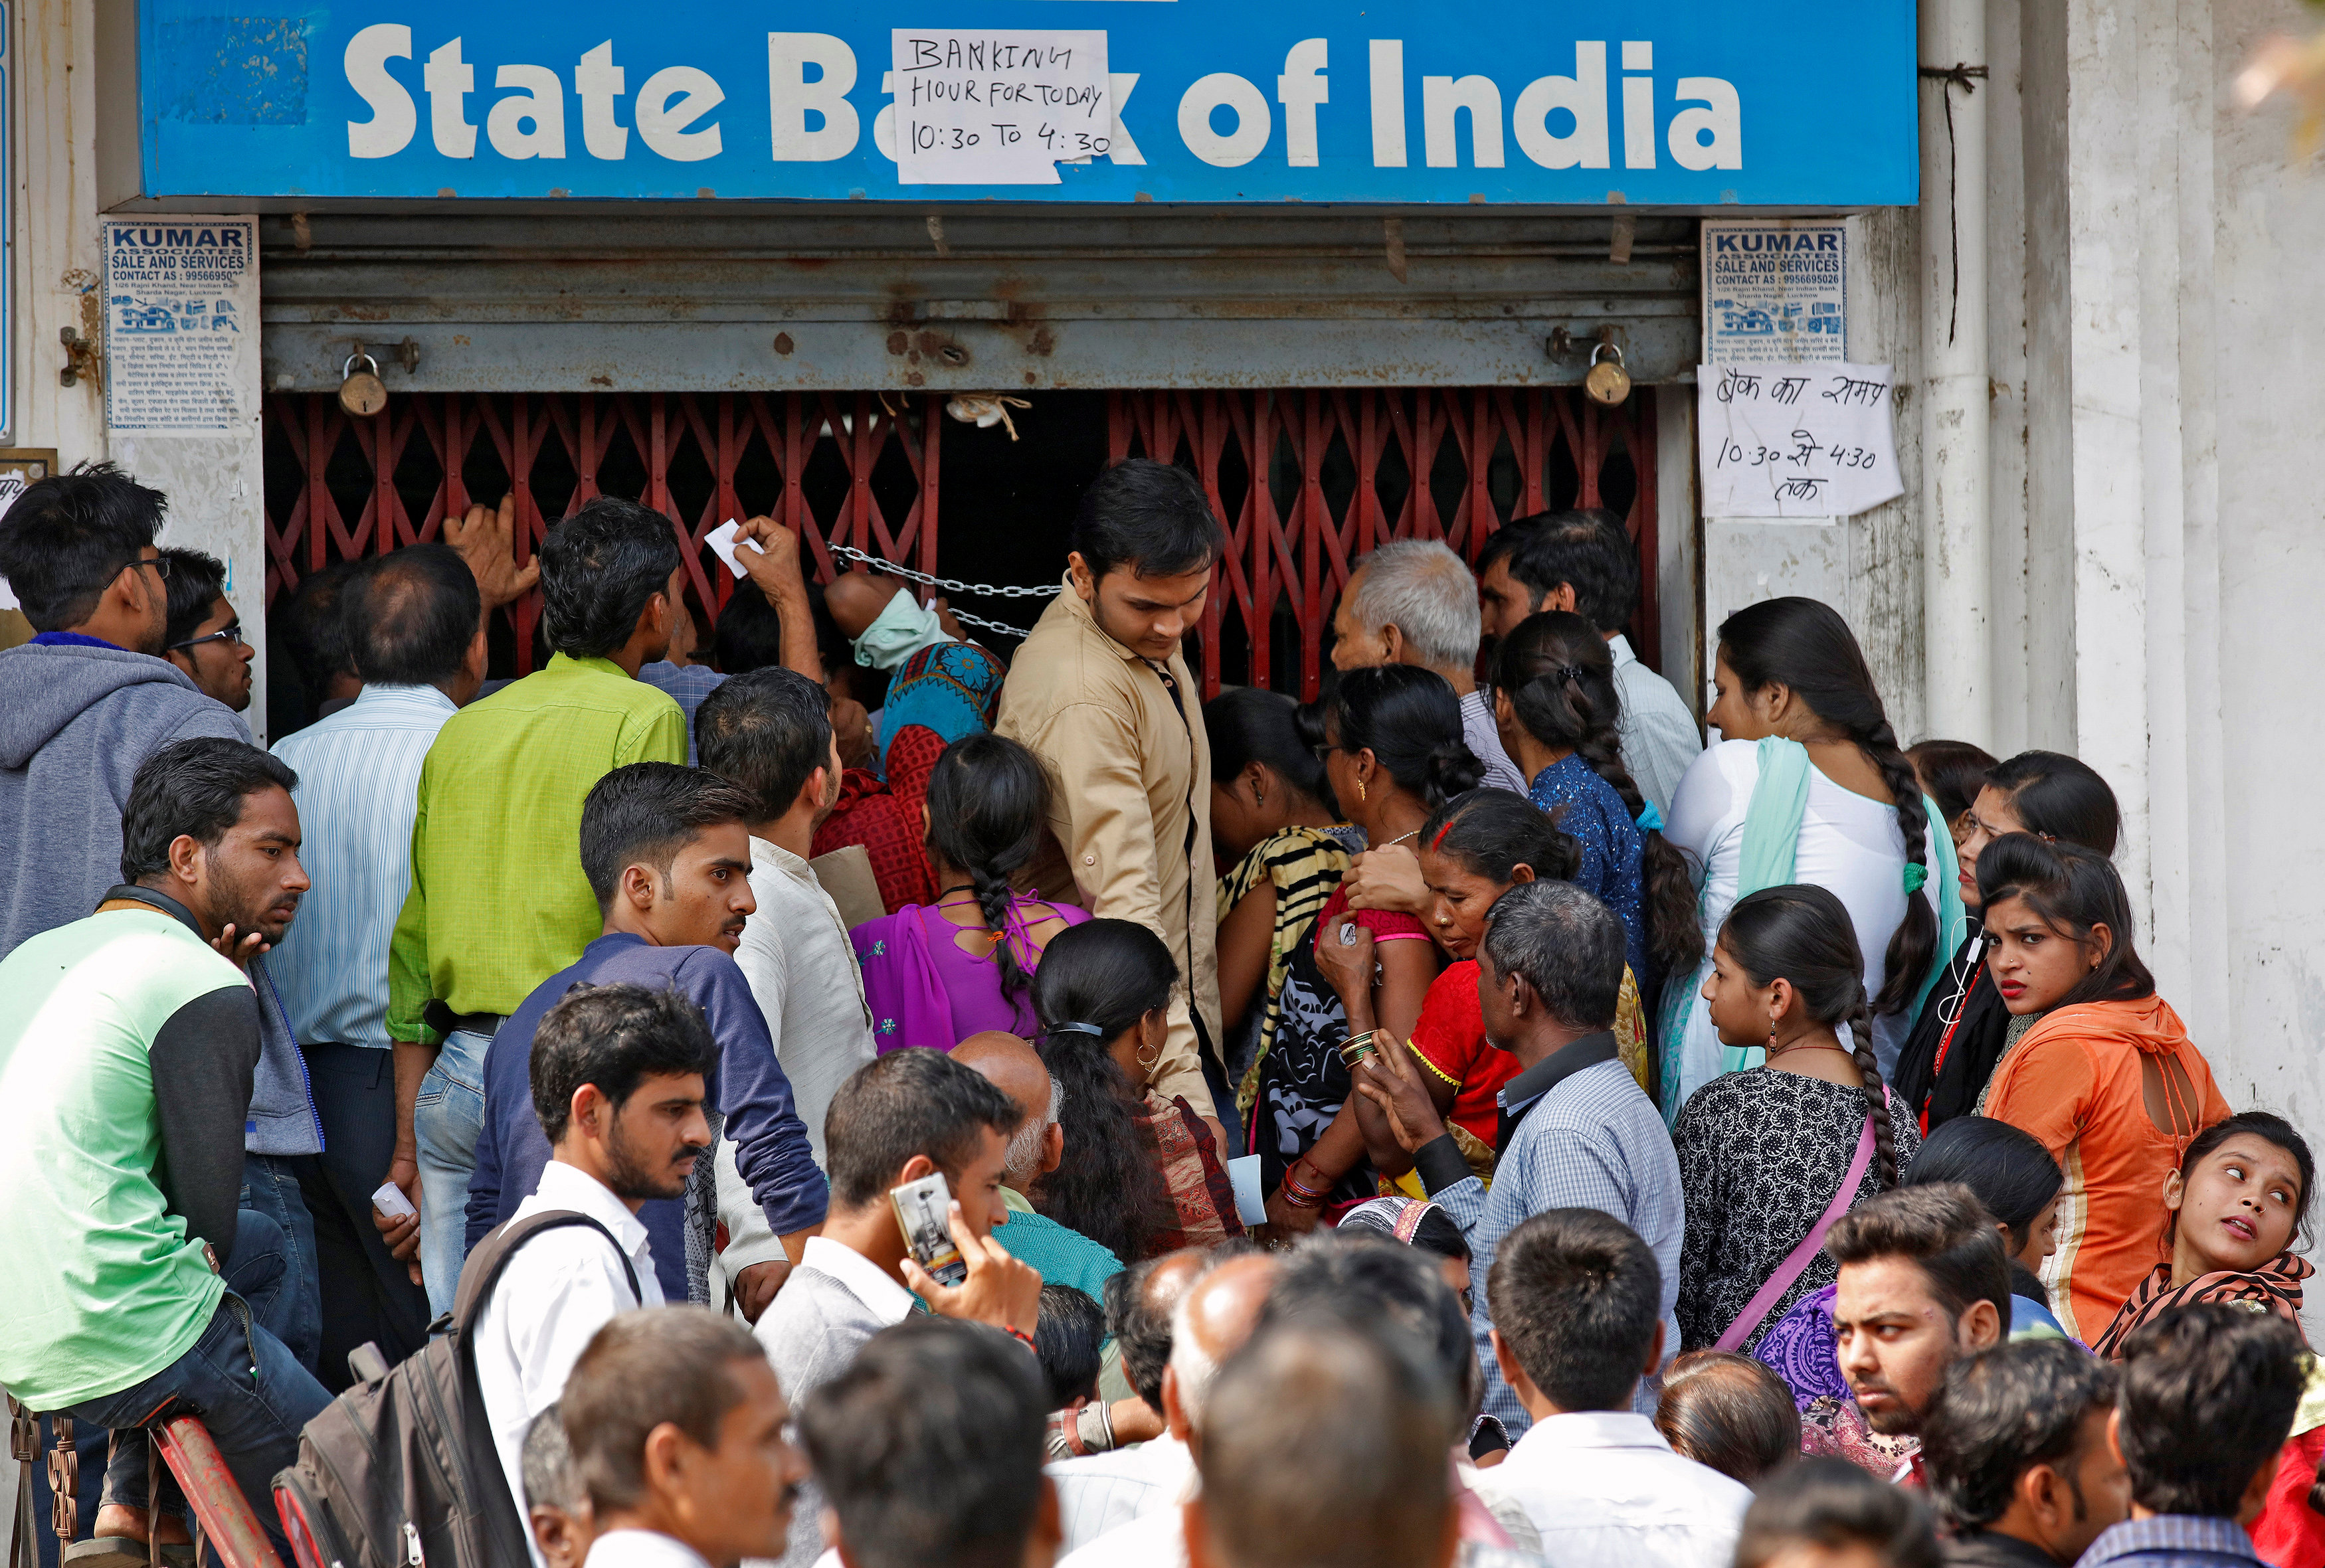 Indelible ink to check syndicates: Indian government on currency woes